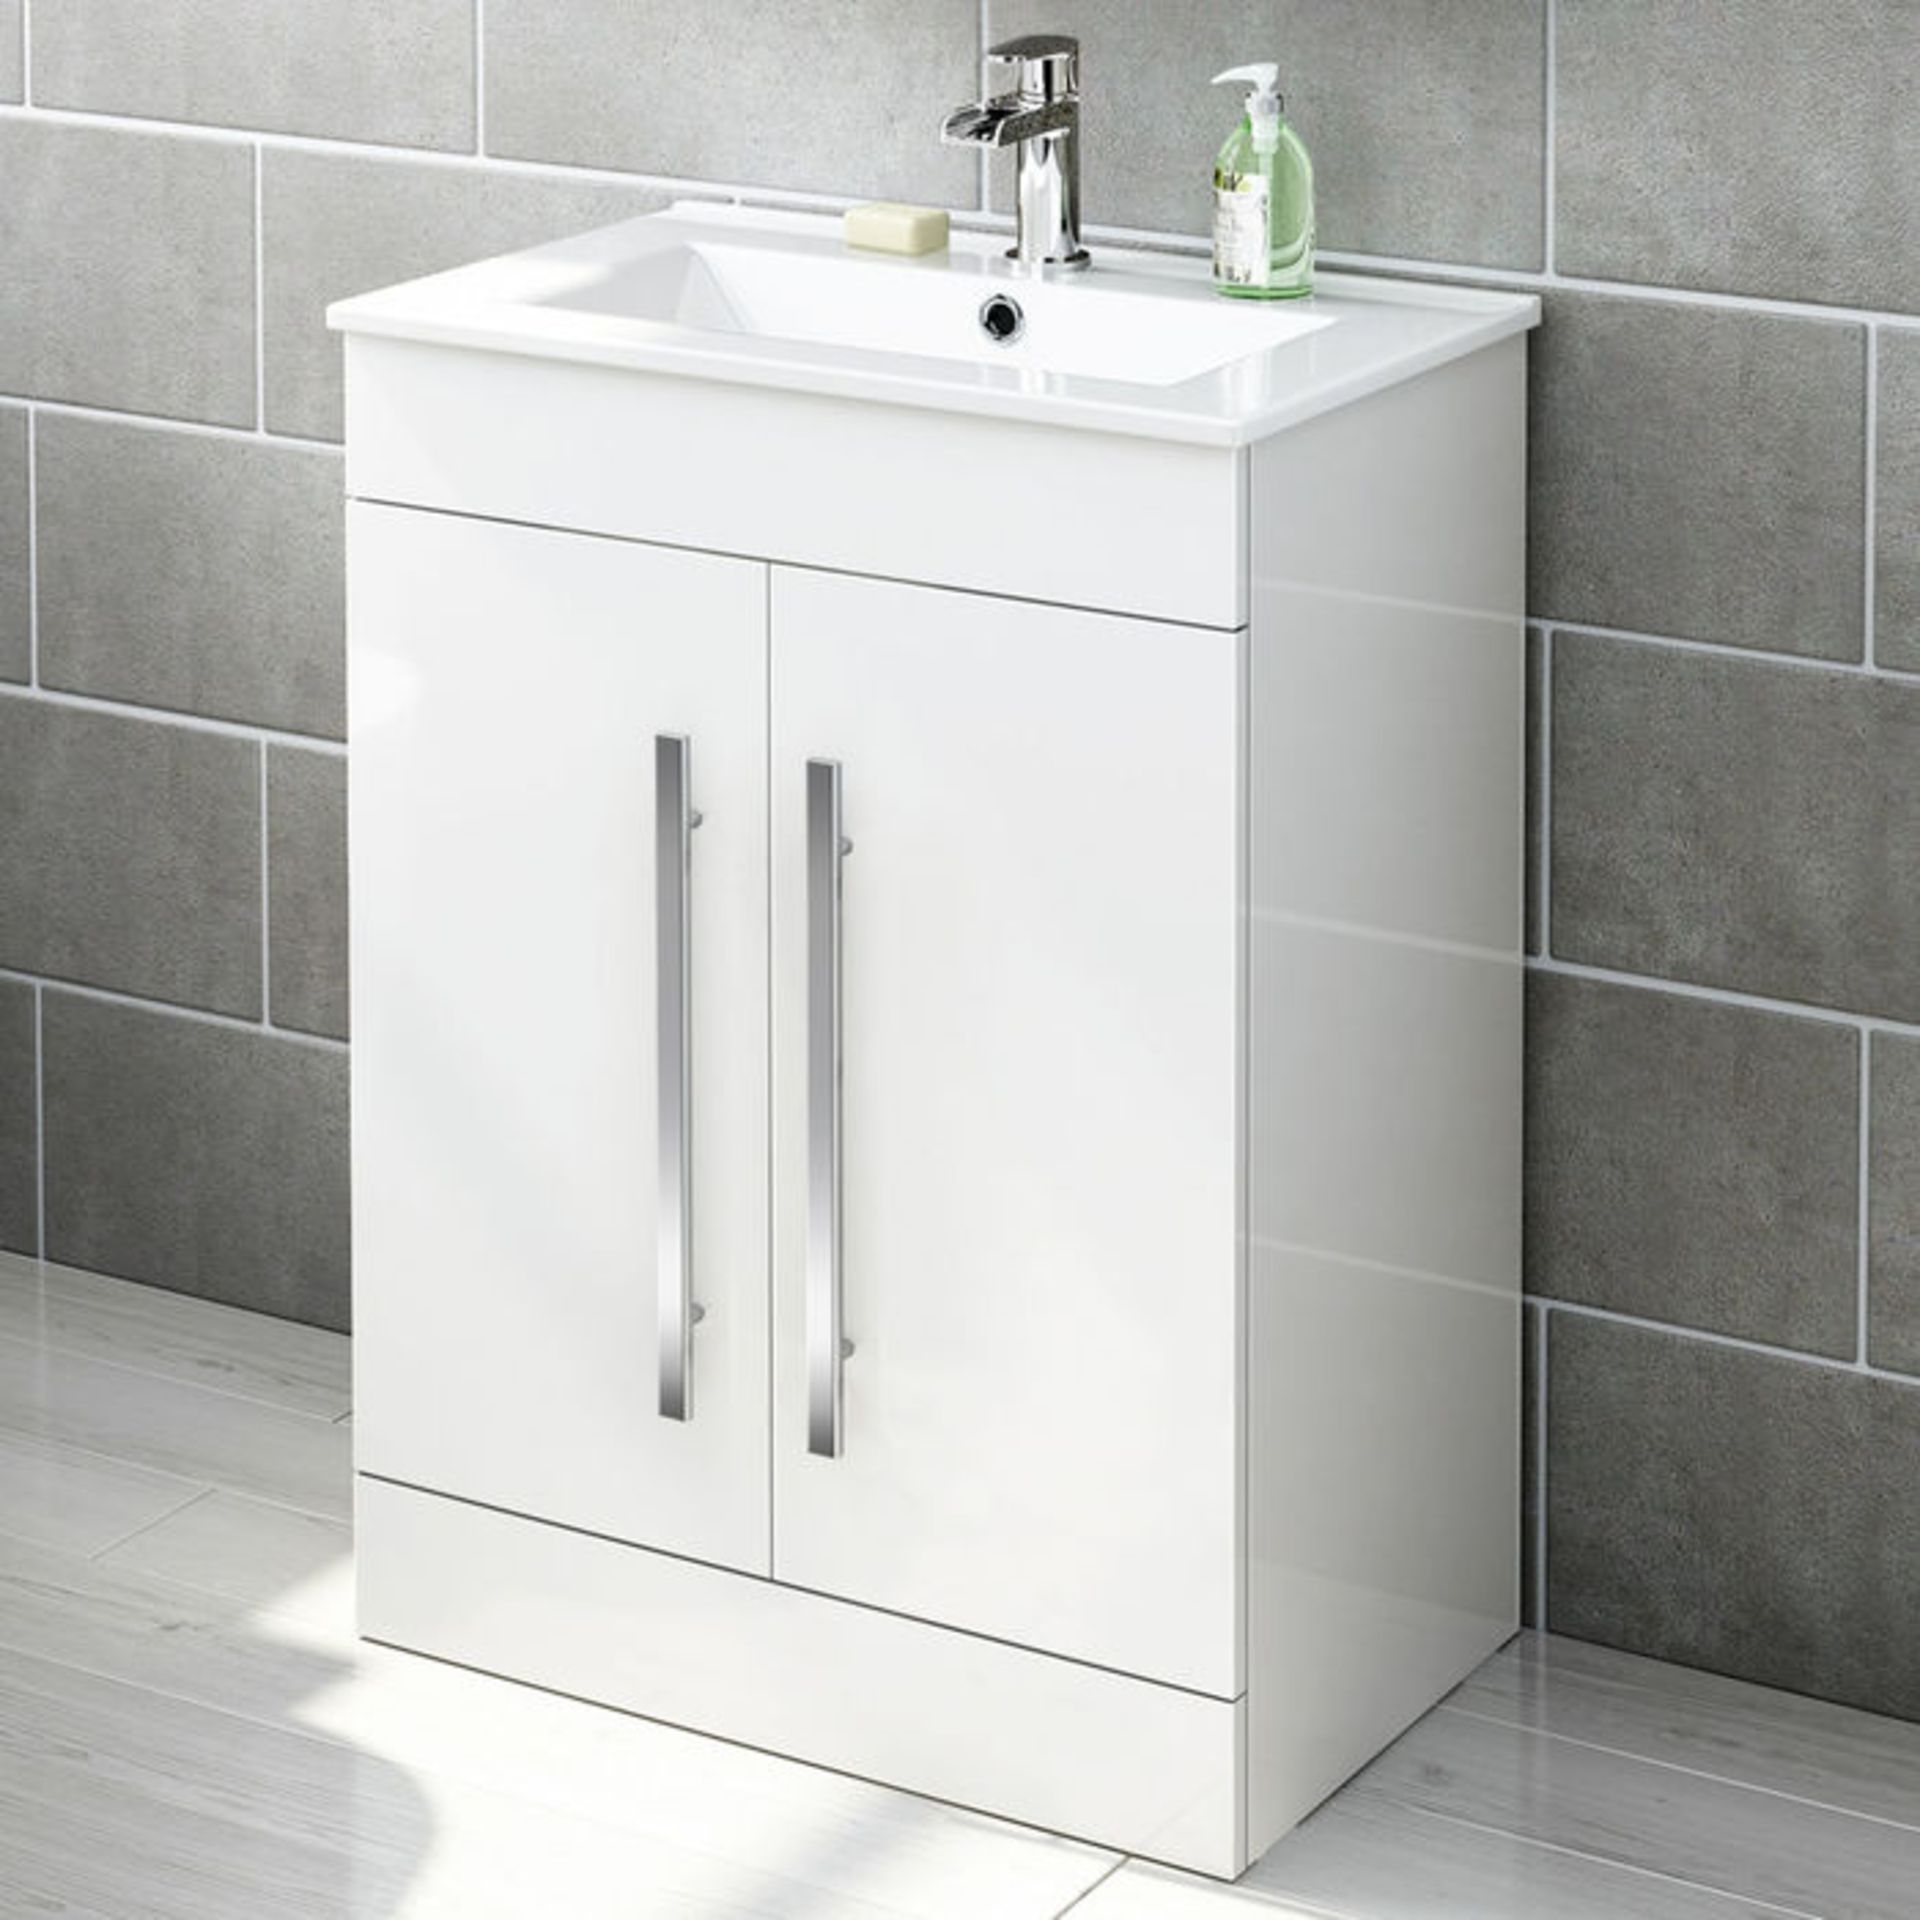 (AH27) 600mm Avon High Gloss White Basin Cabinet - Floor Standing. RRP £499.99. Comes complete